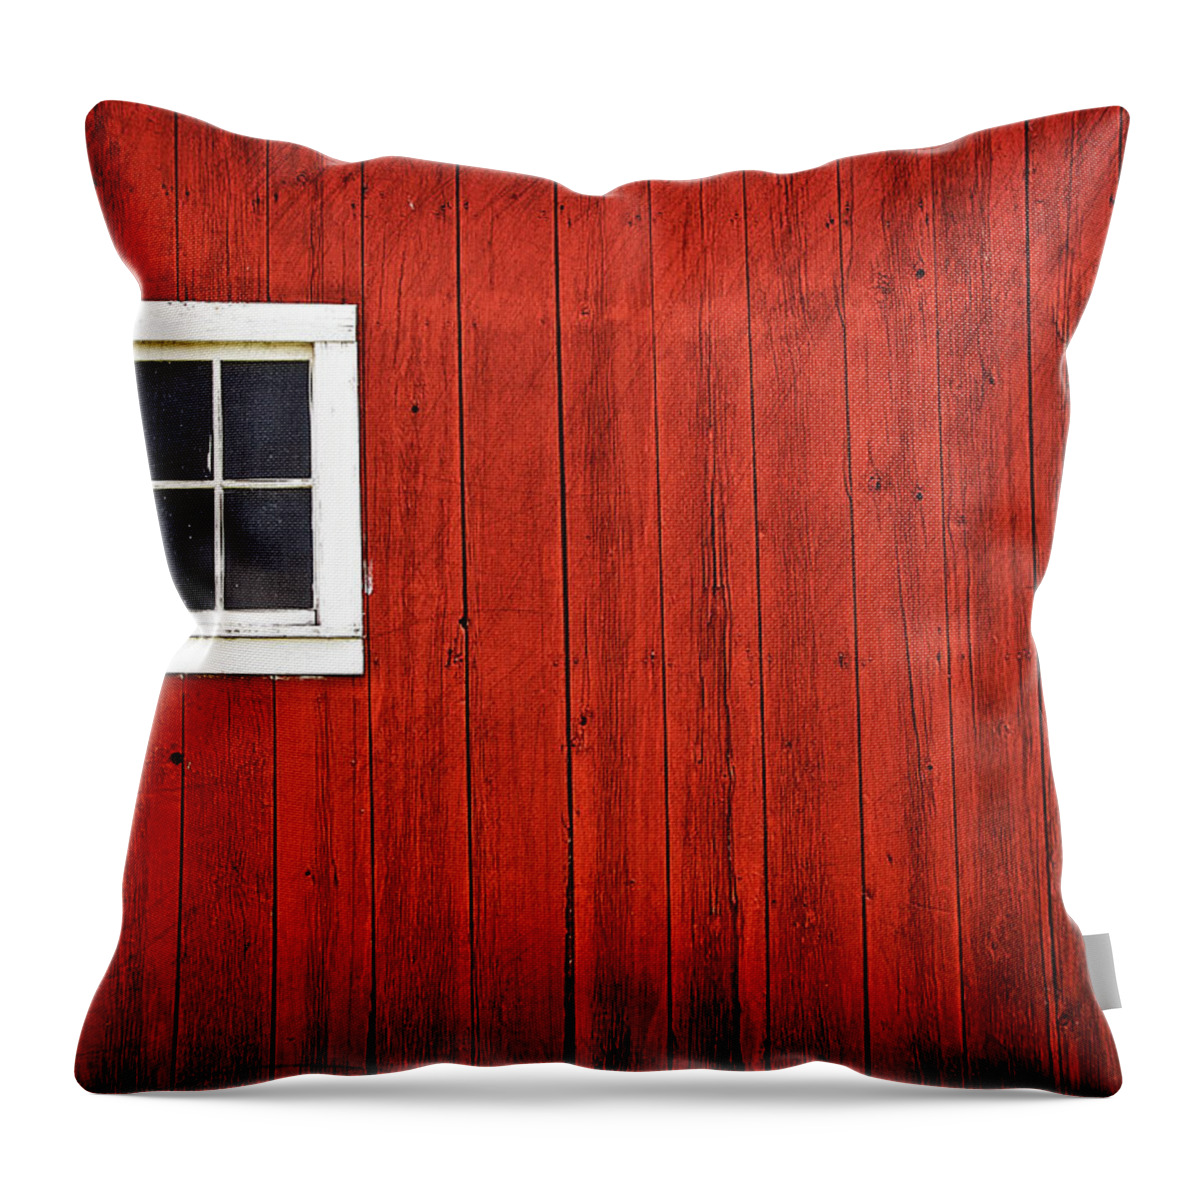 Agriculture Throw Pillow featuring the photograph Barn Window by Jarrod Erbe